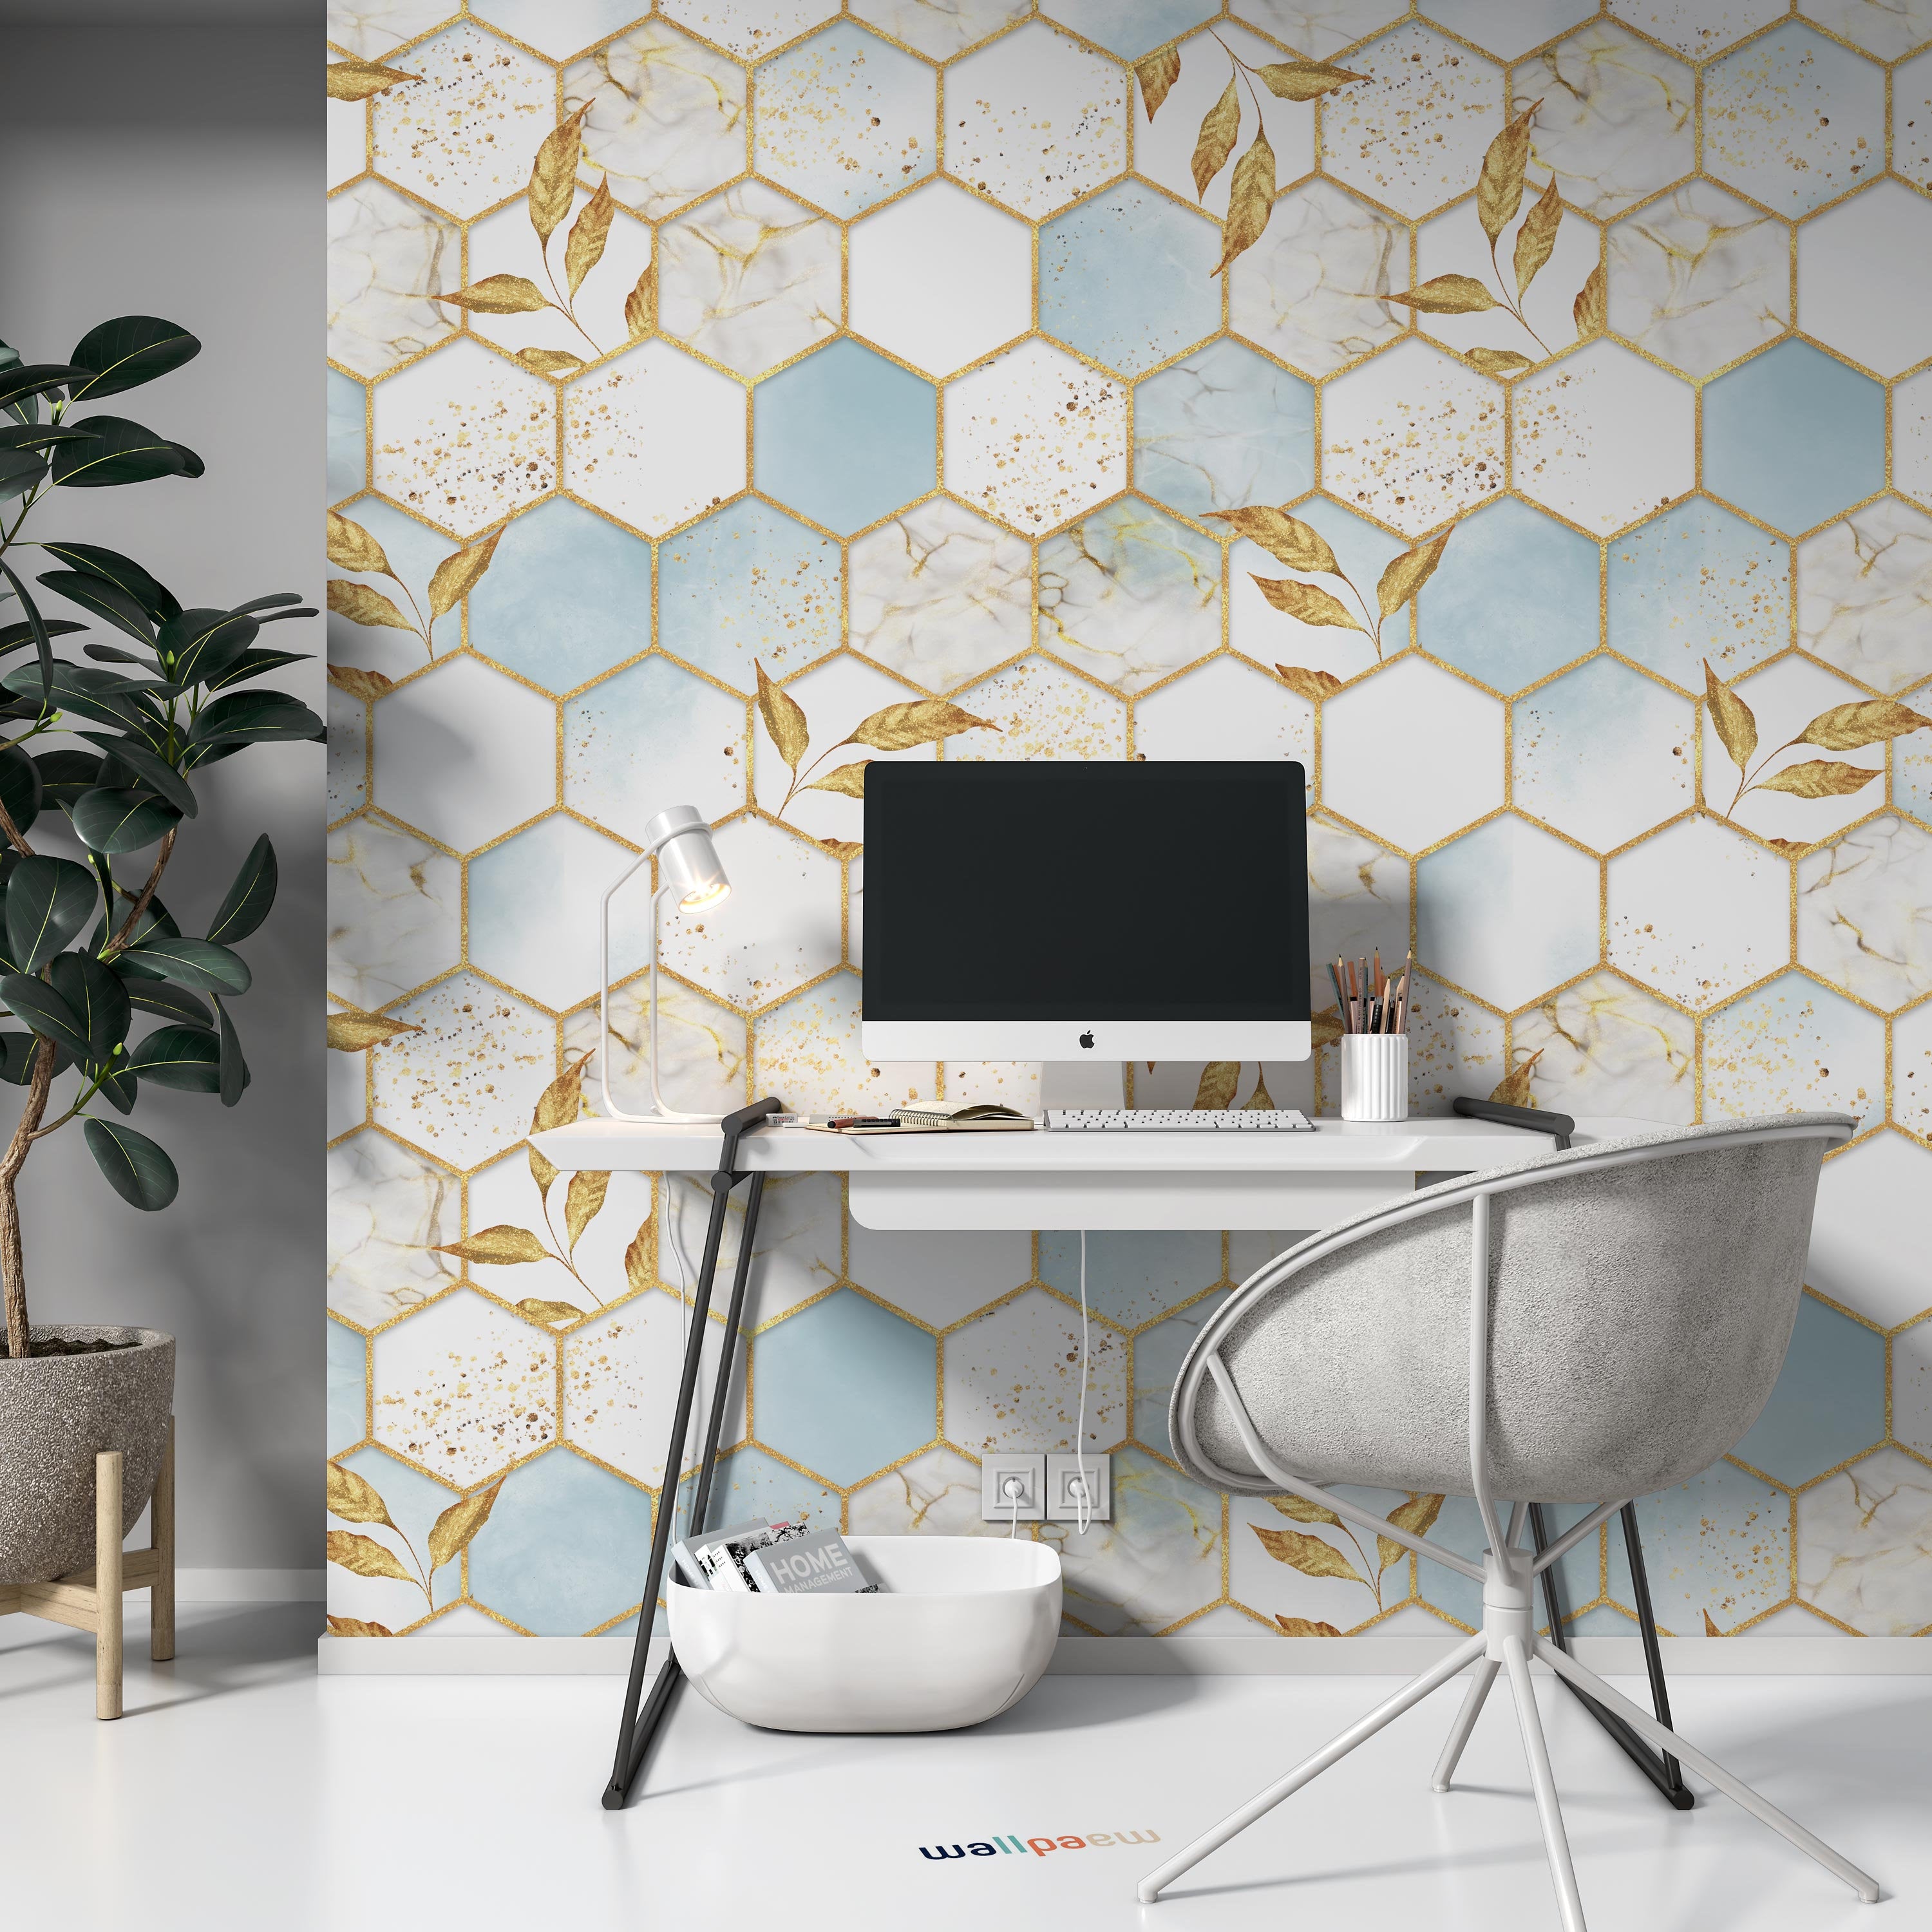 Marble Hexagon Texture with Golden Leaves Abstract Geometric Background Wallpaper Self Adhesive Peel & Stick Wall Sticker Wall Decoration